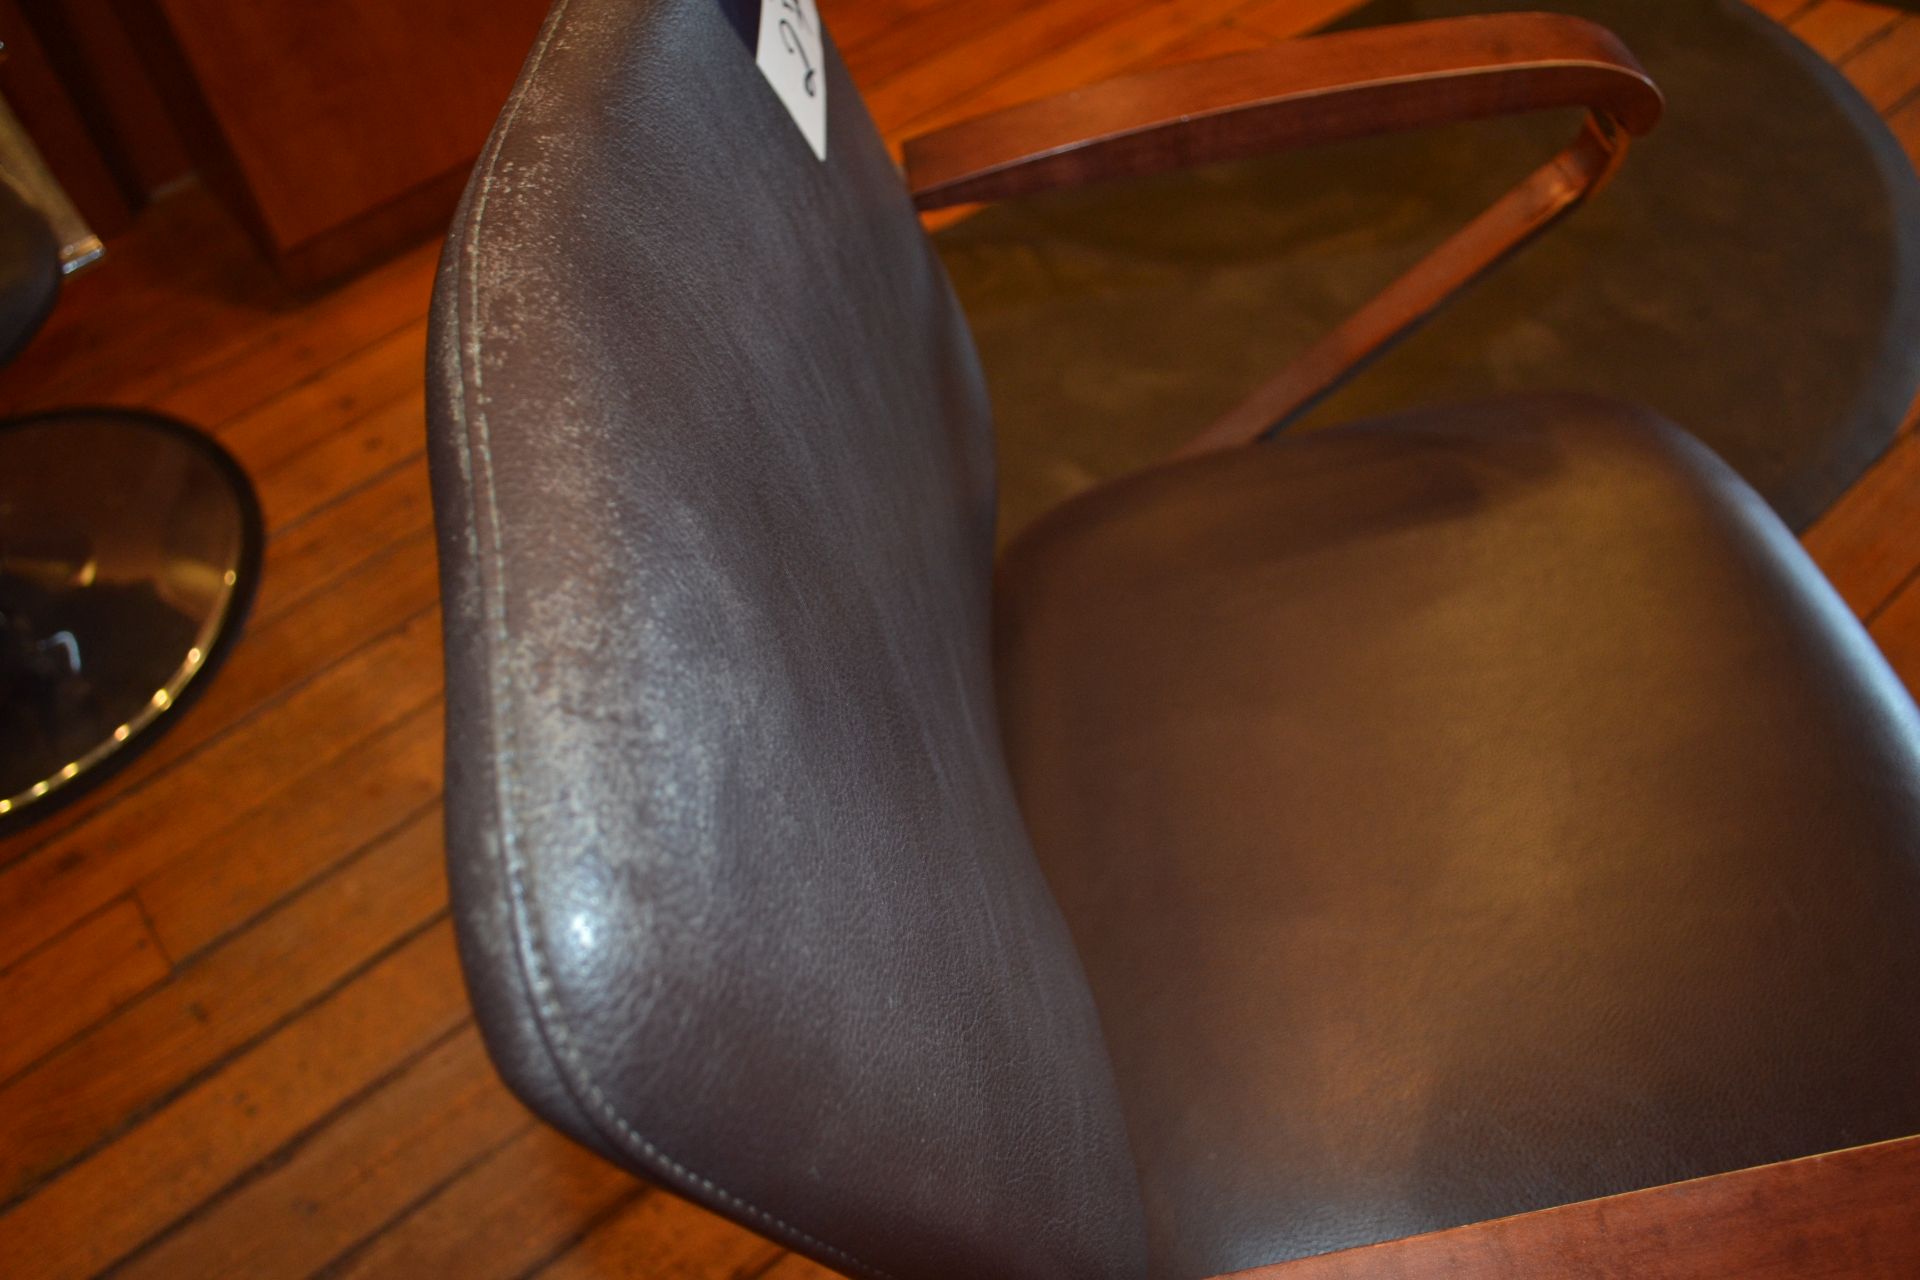 Formatron Wave, Hydraulic Styling Chair - Image 3 of 6